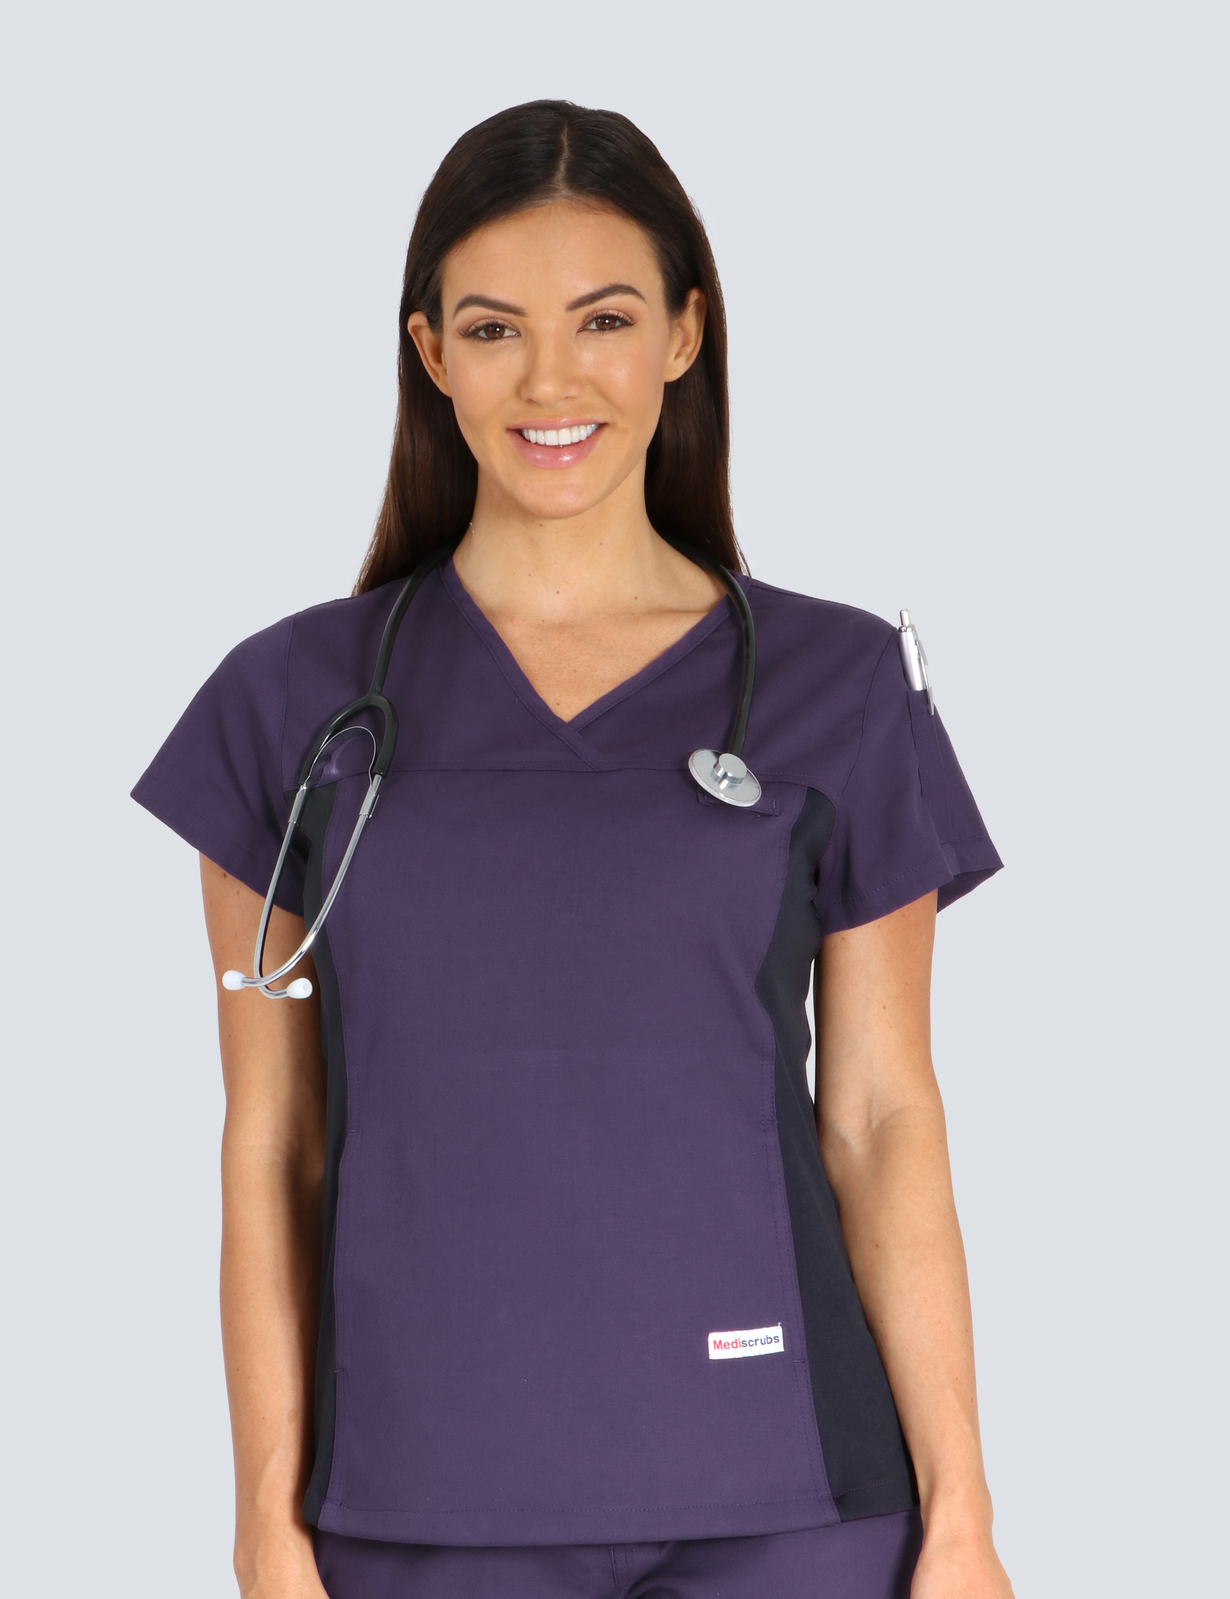 Women's Fit Spandex Redland Hospital - Pharmacist (top only)